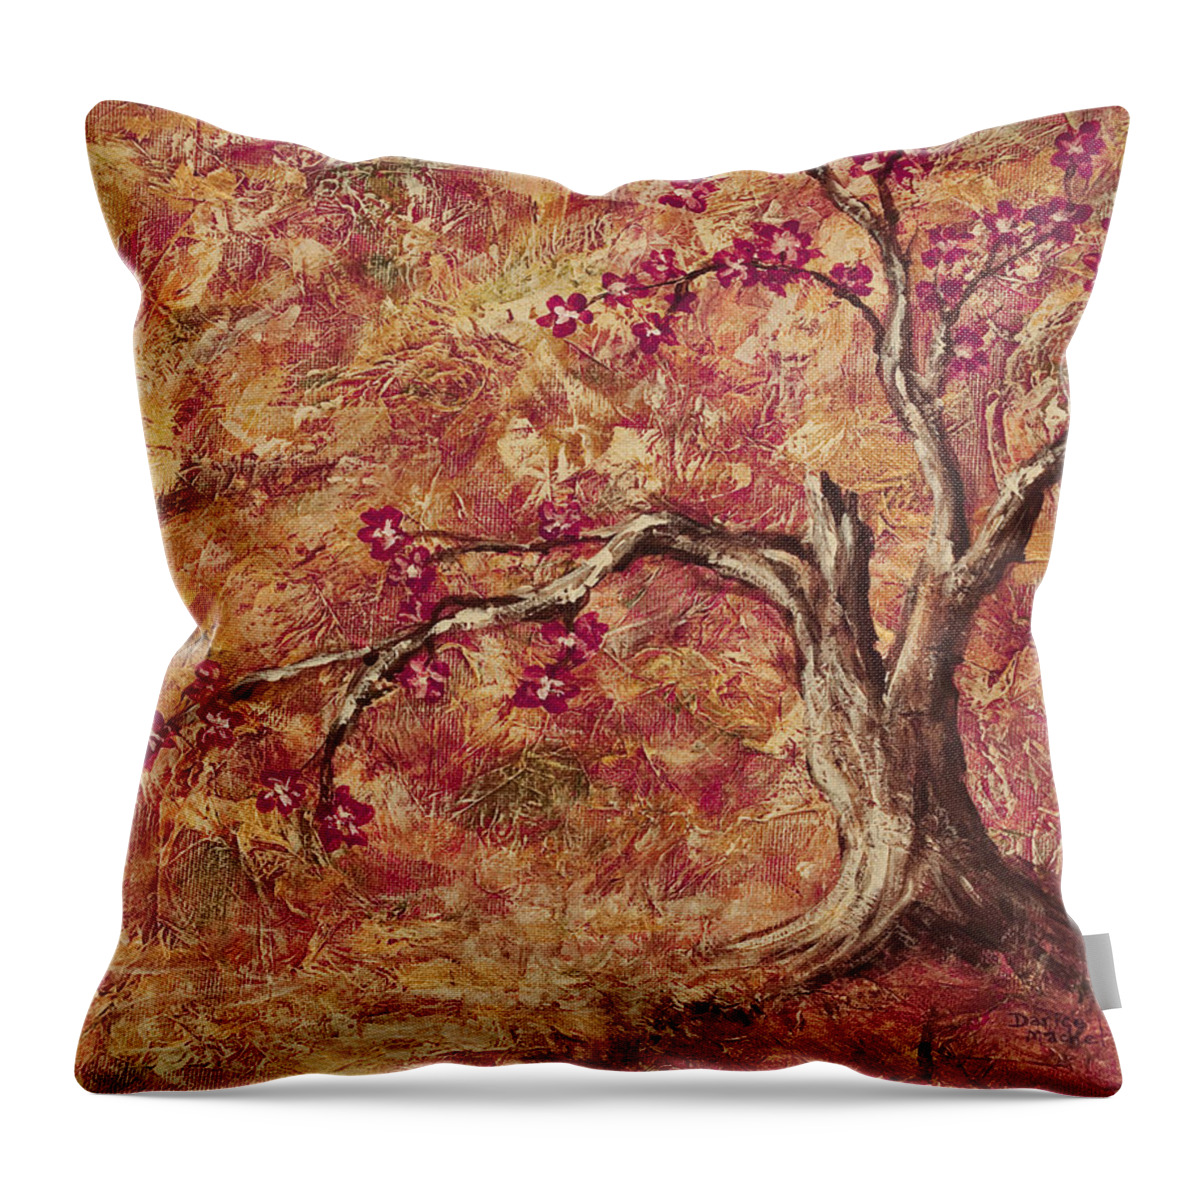 Landscape Throw Pillow featuring the painting Tree Of Life by Darice Machel McGuire